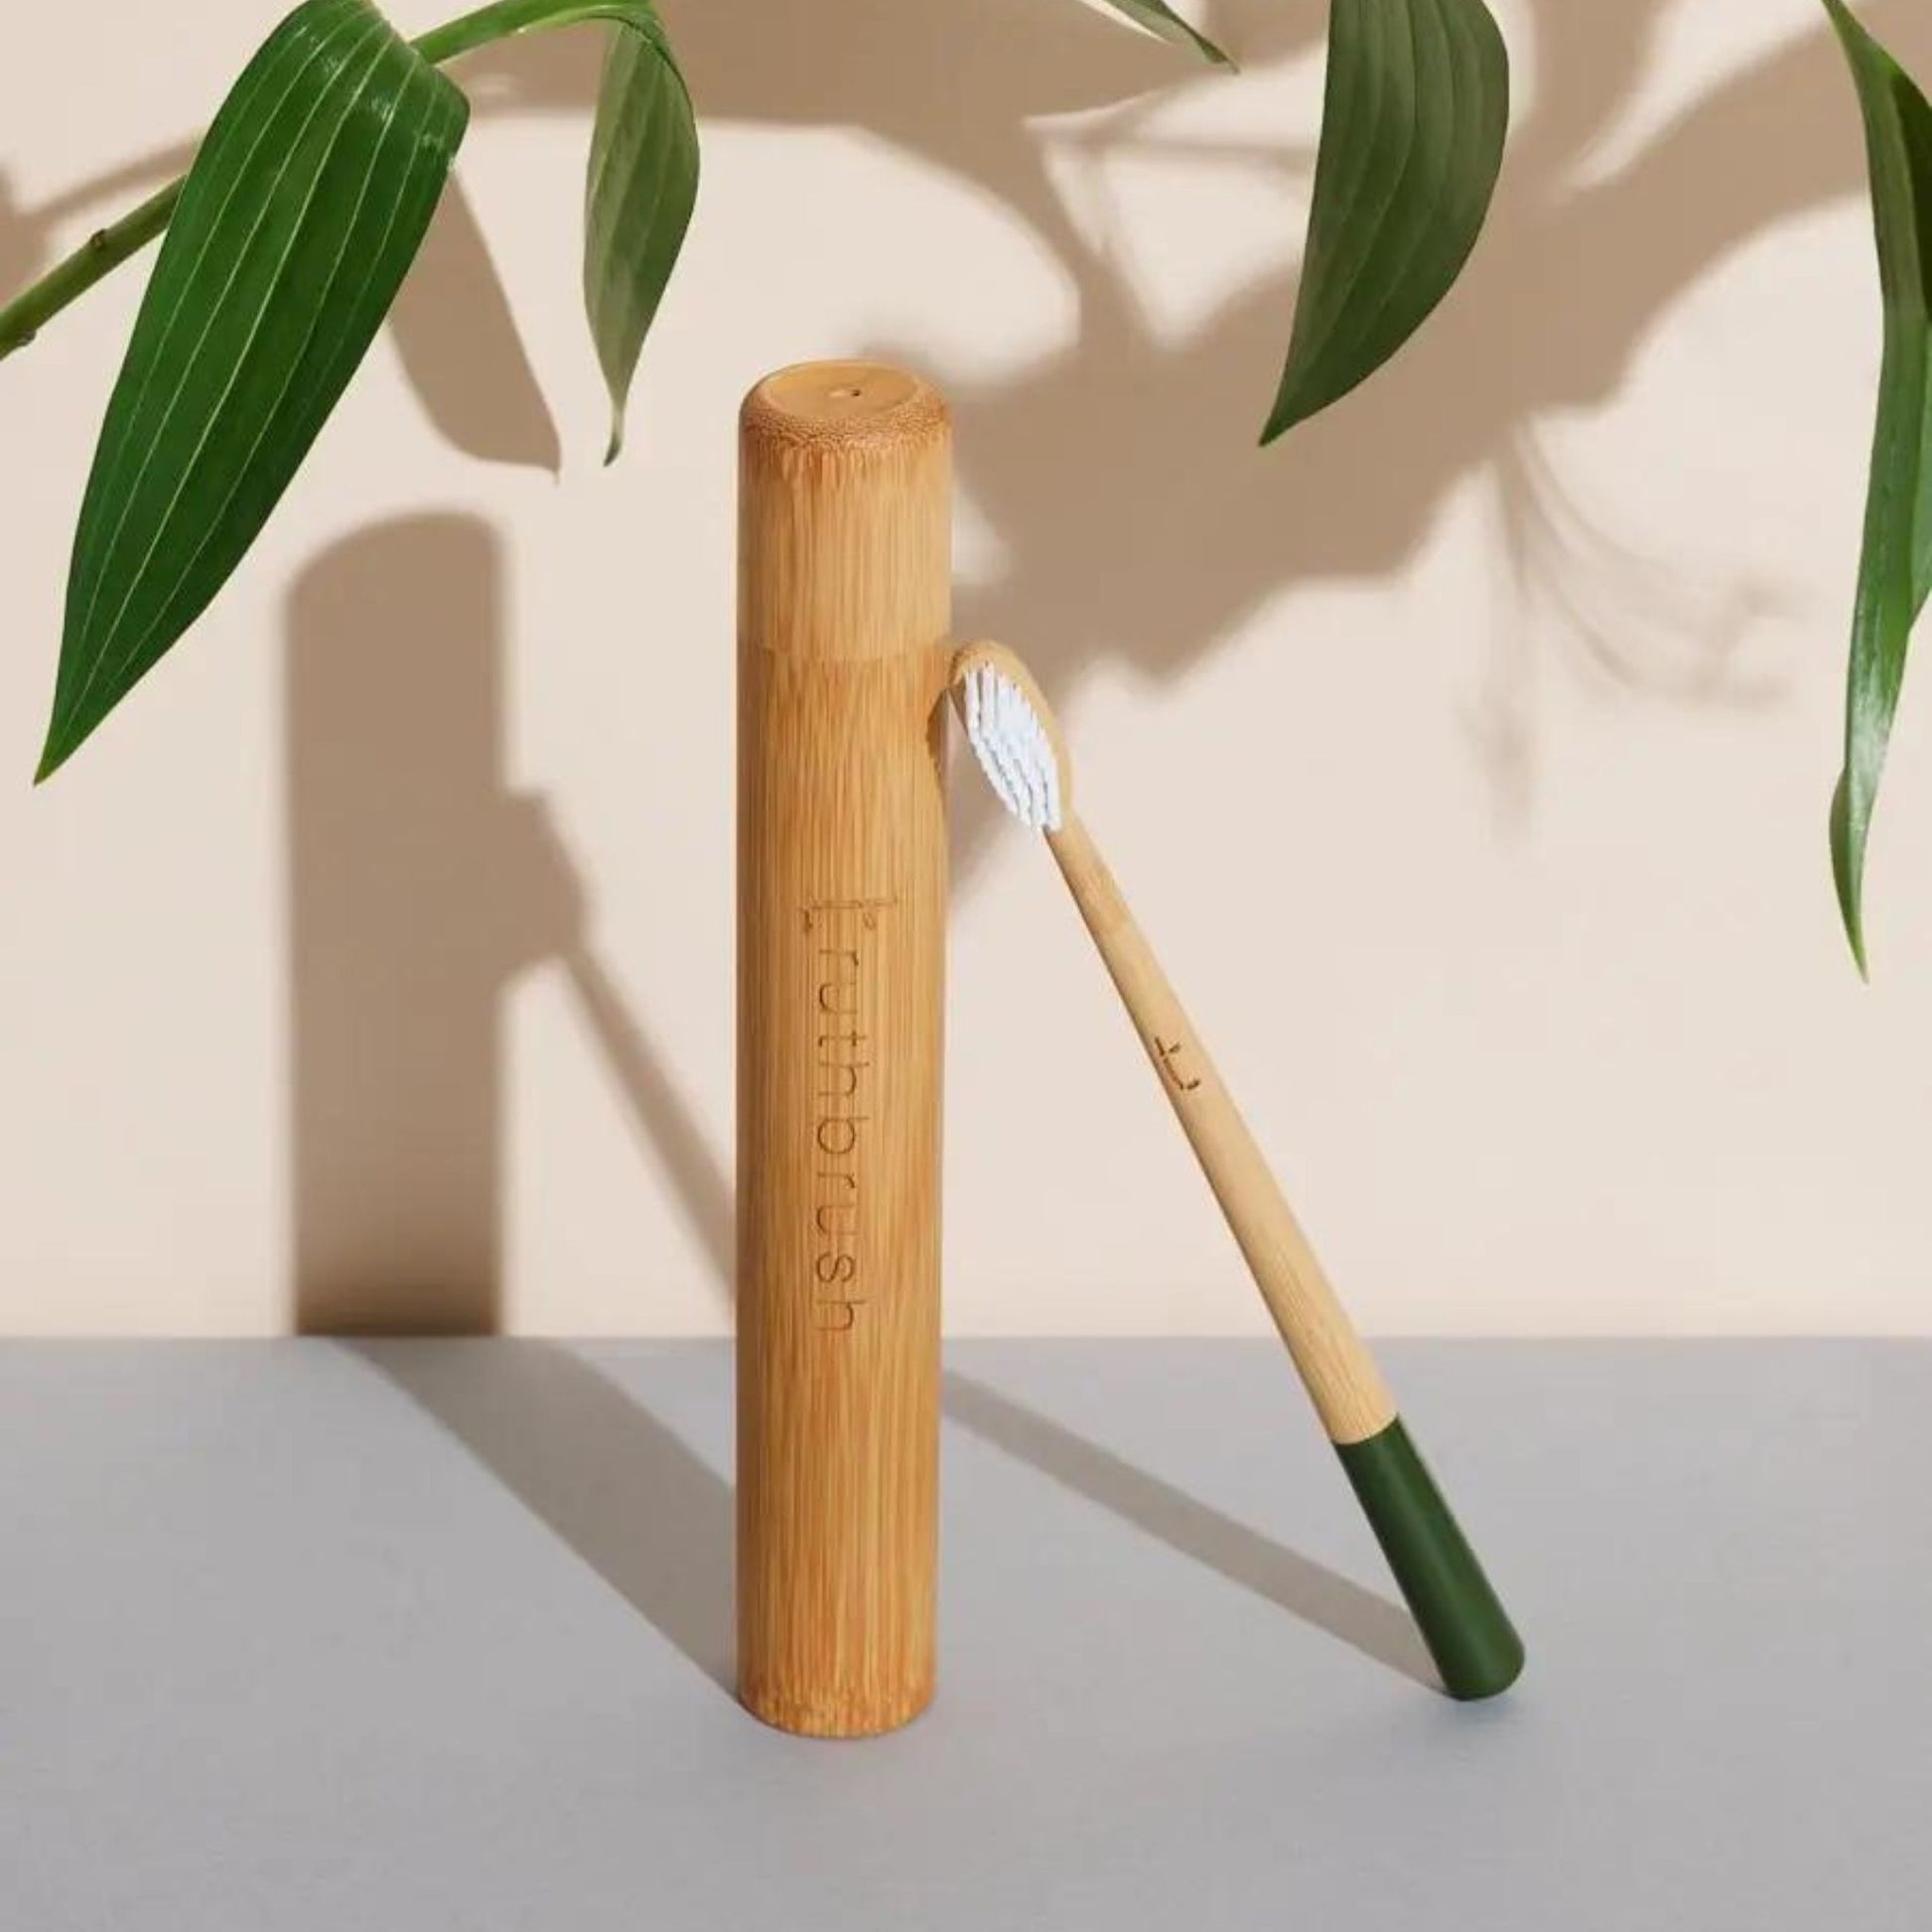 Bamboo toothbrush with Medium plant-based bristles in green with a Bamboo case